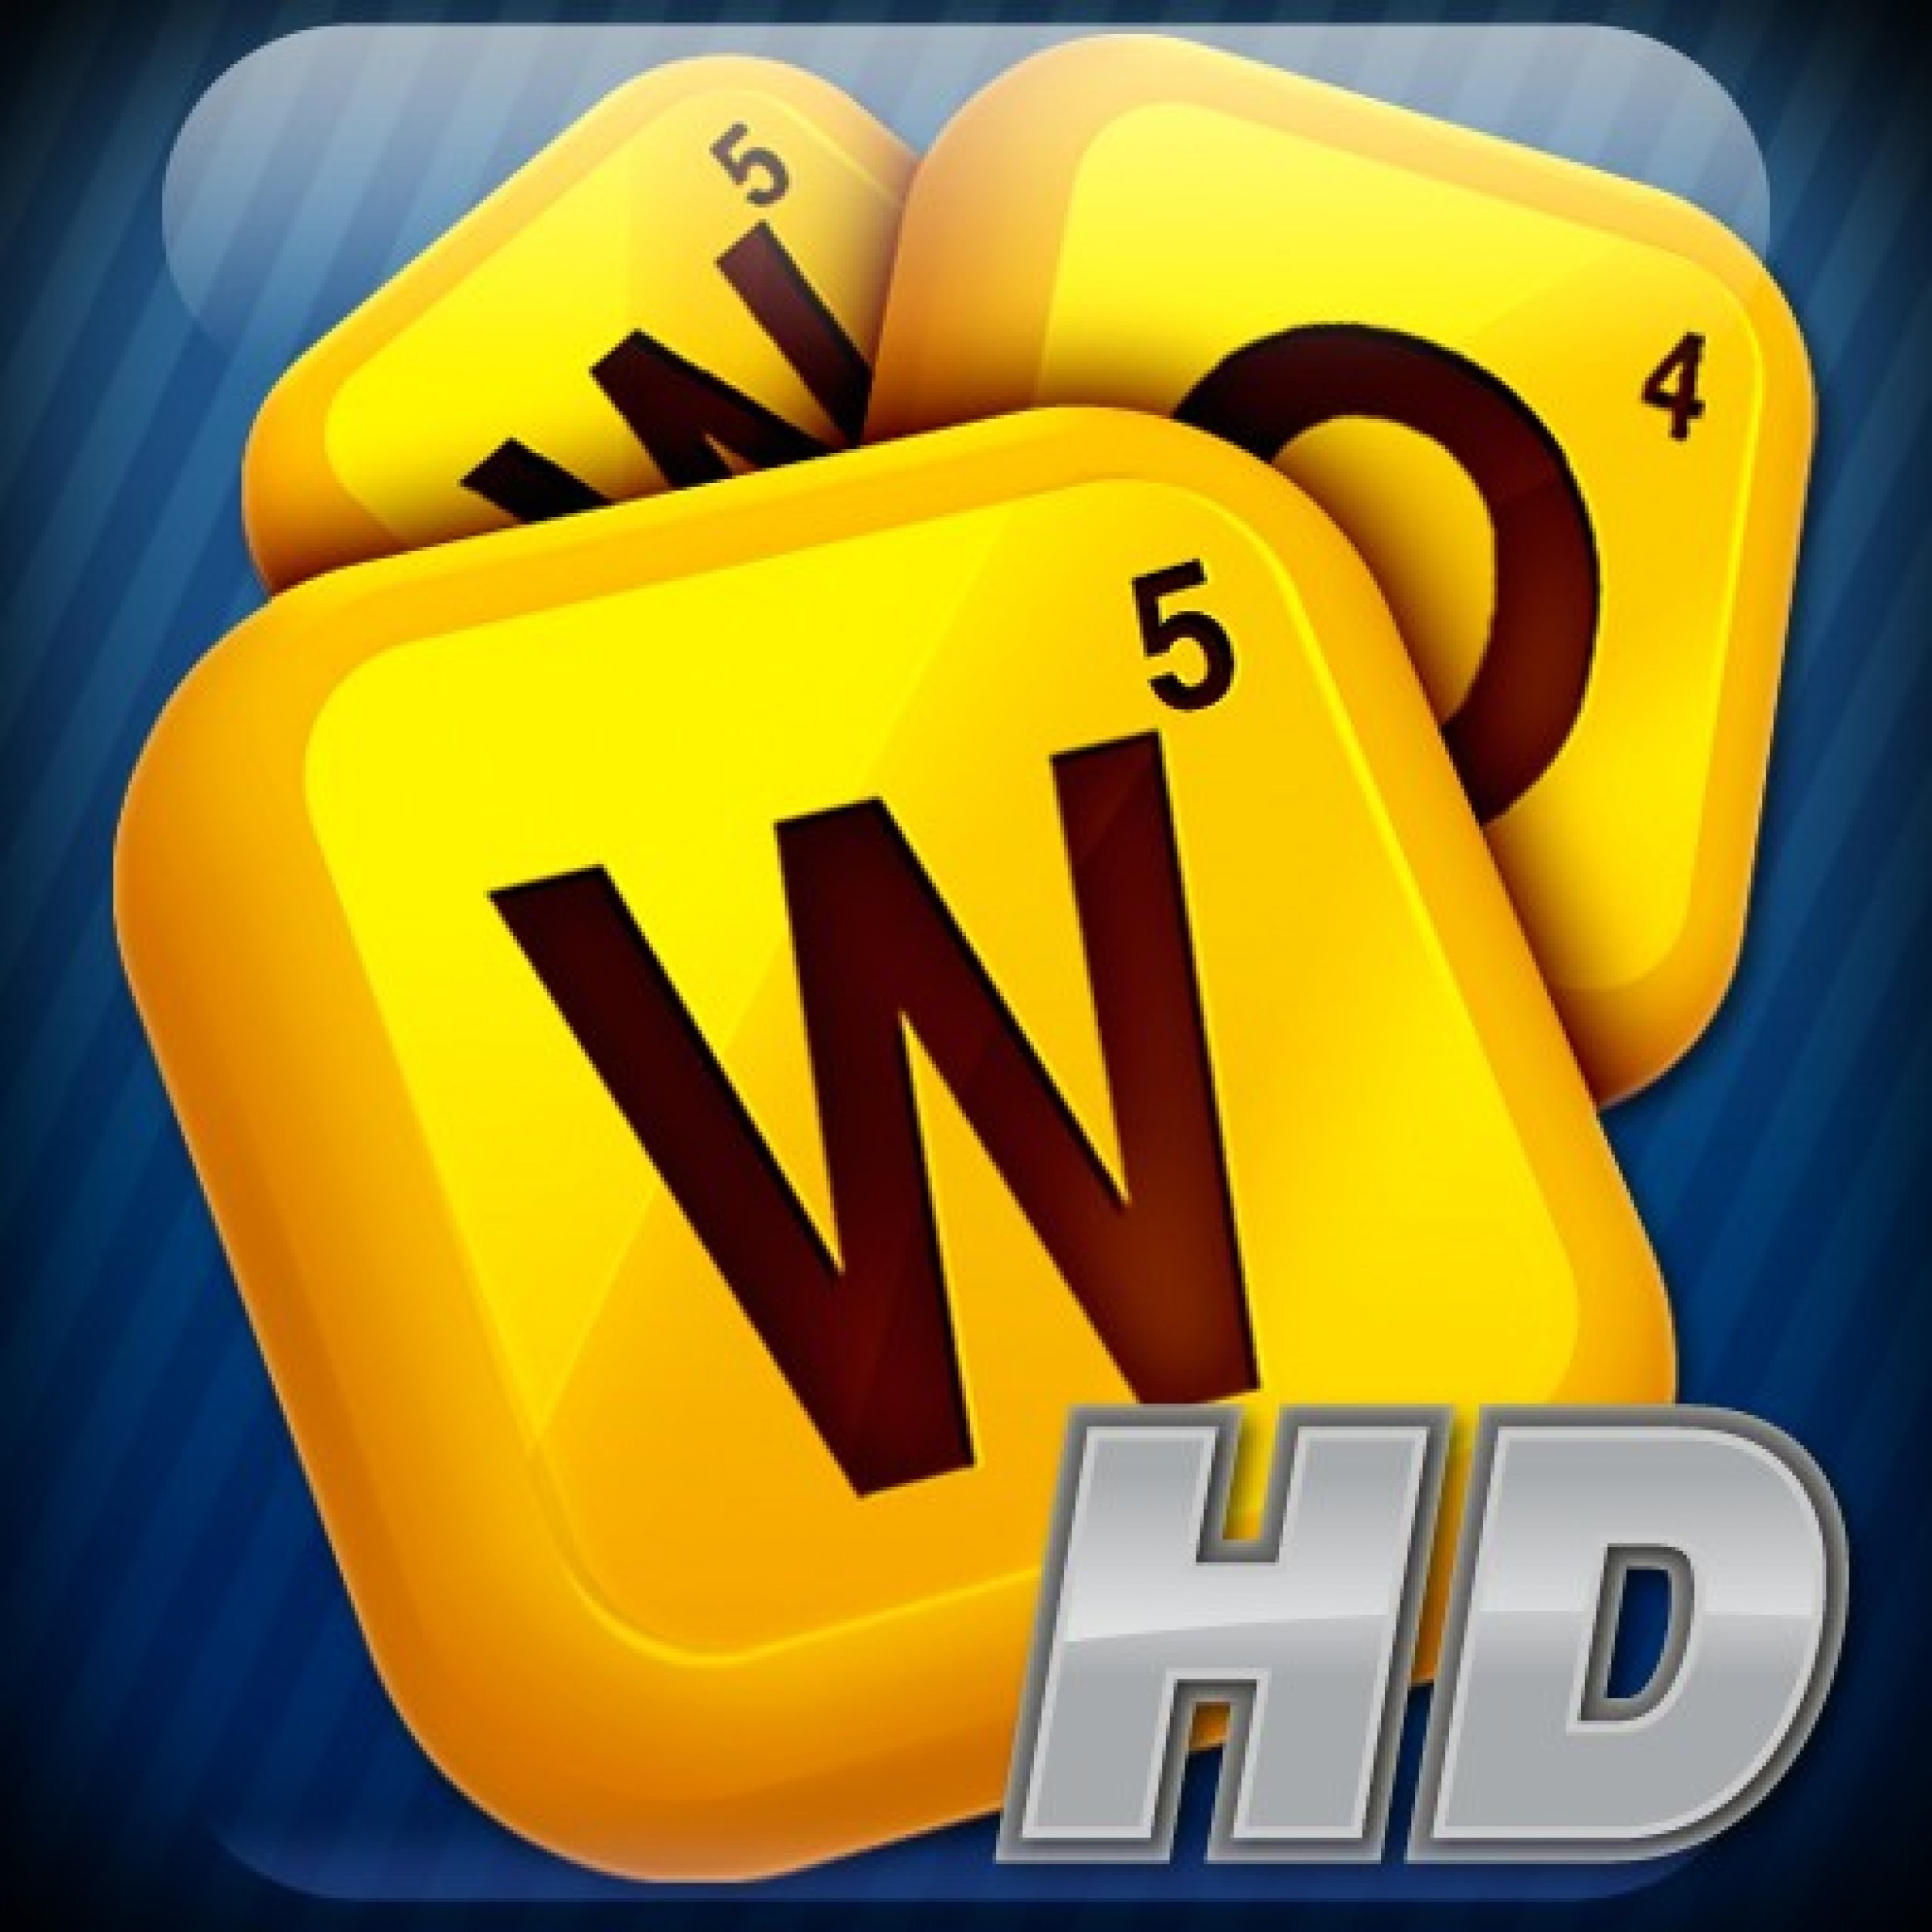 Words With Friends HD